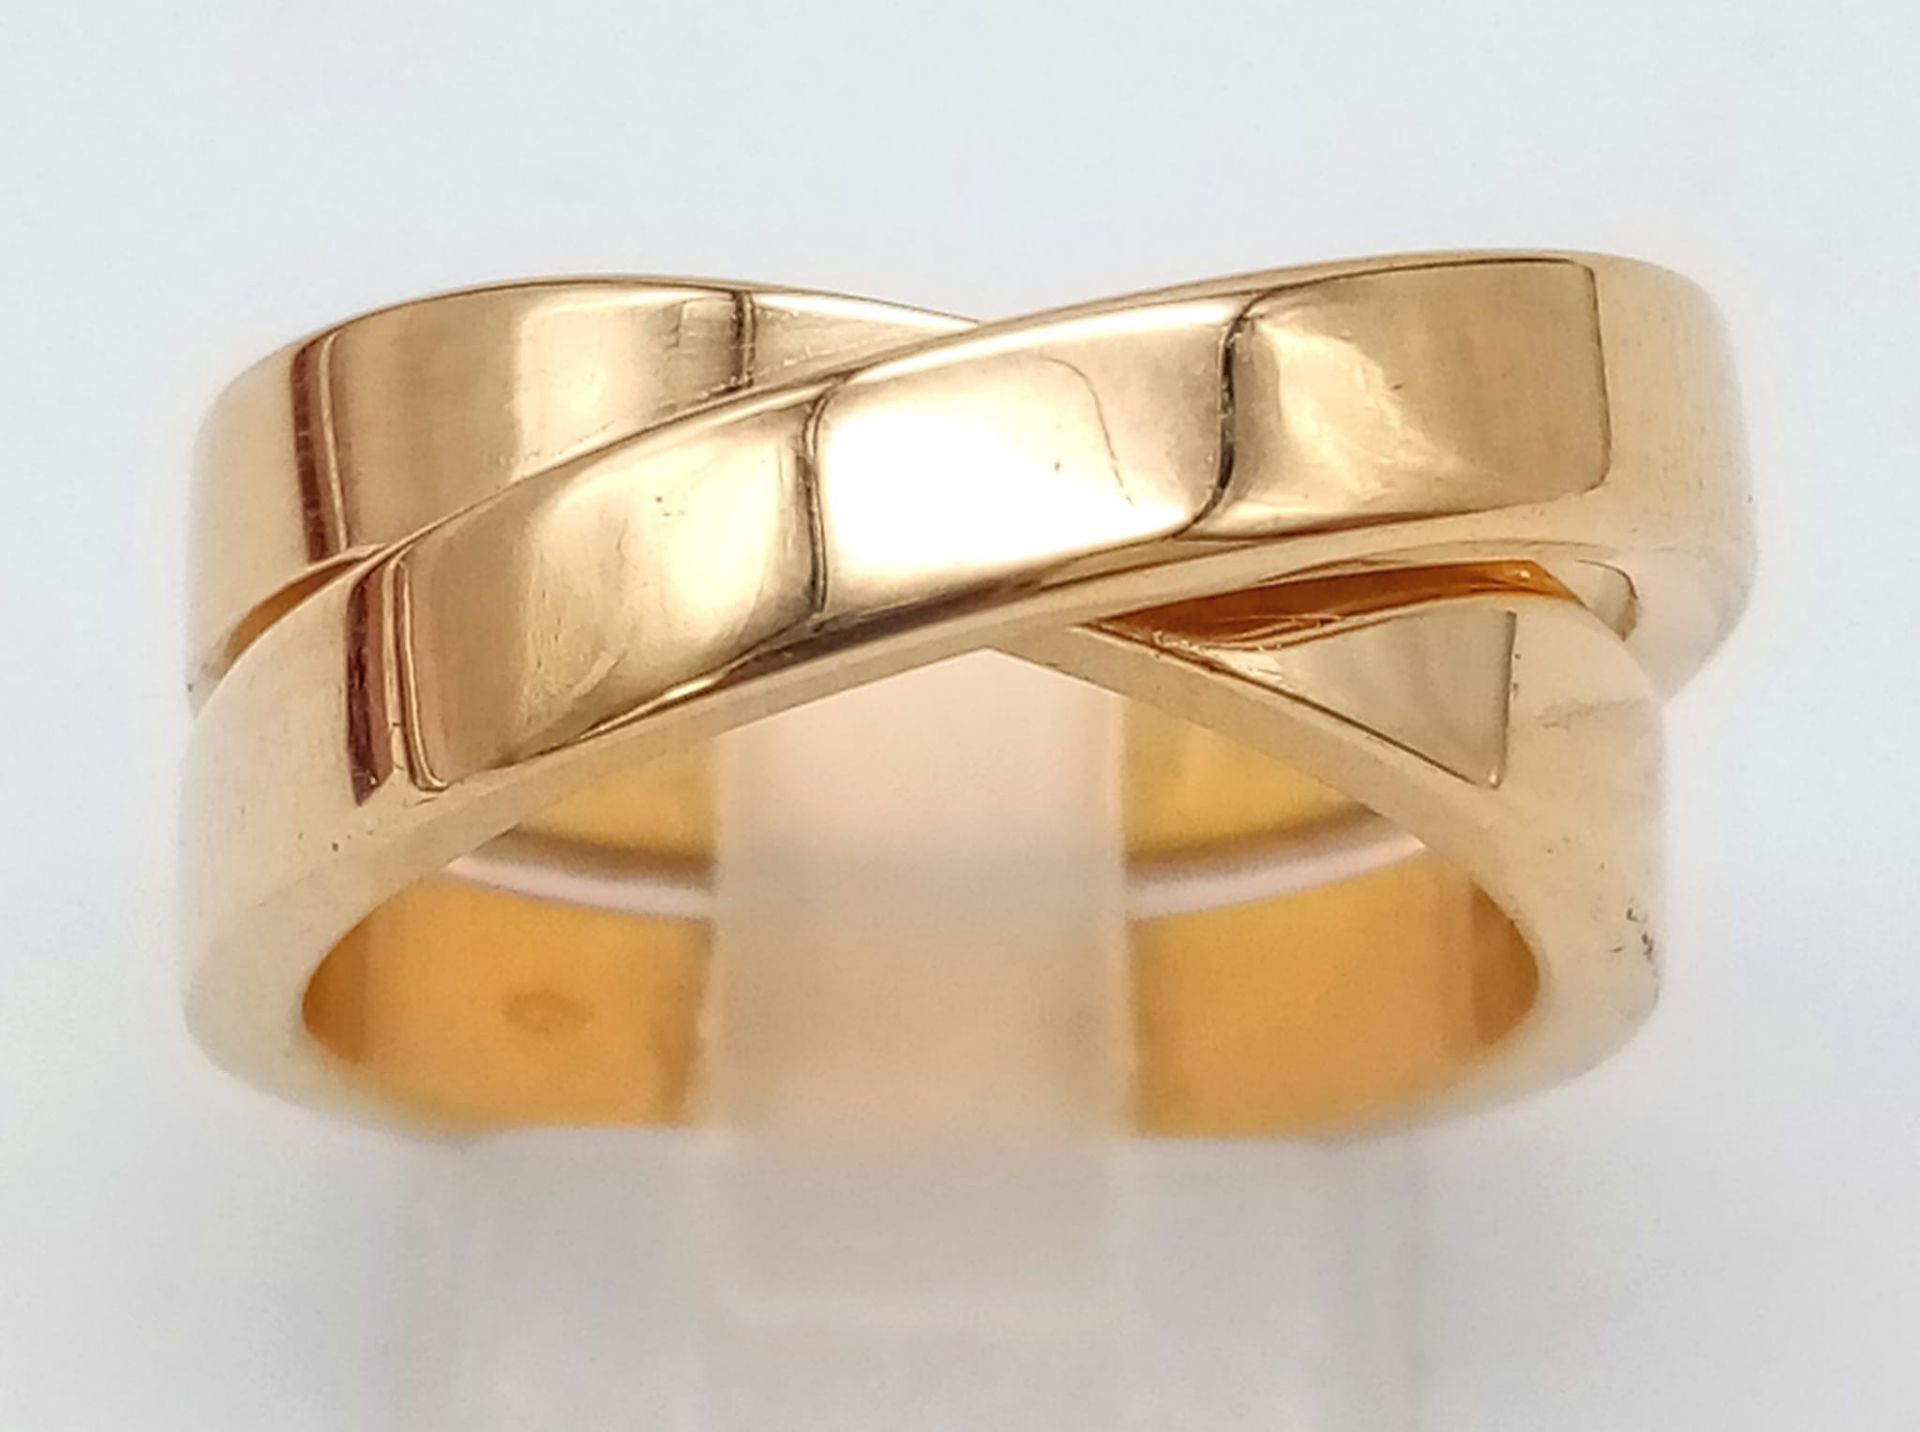 CARTIER 18K YELLOW GOLD CROSS OVER RING WITH ORIGINAL PAPERWORK, WEIGHT 15.1G SIZE O